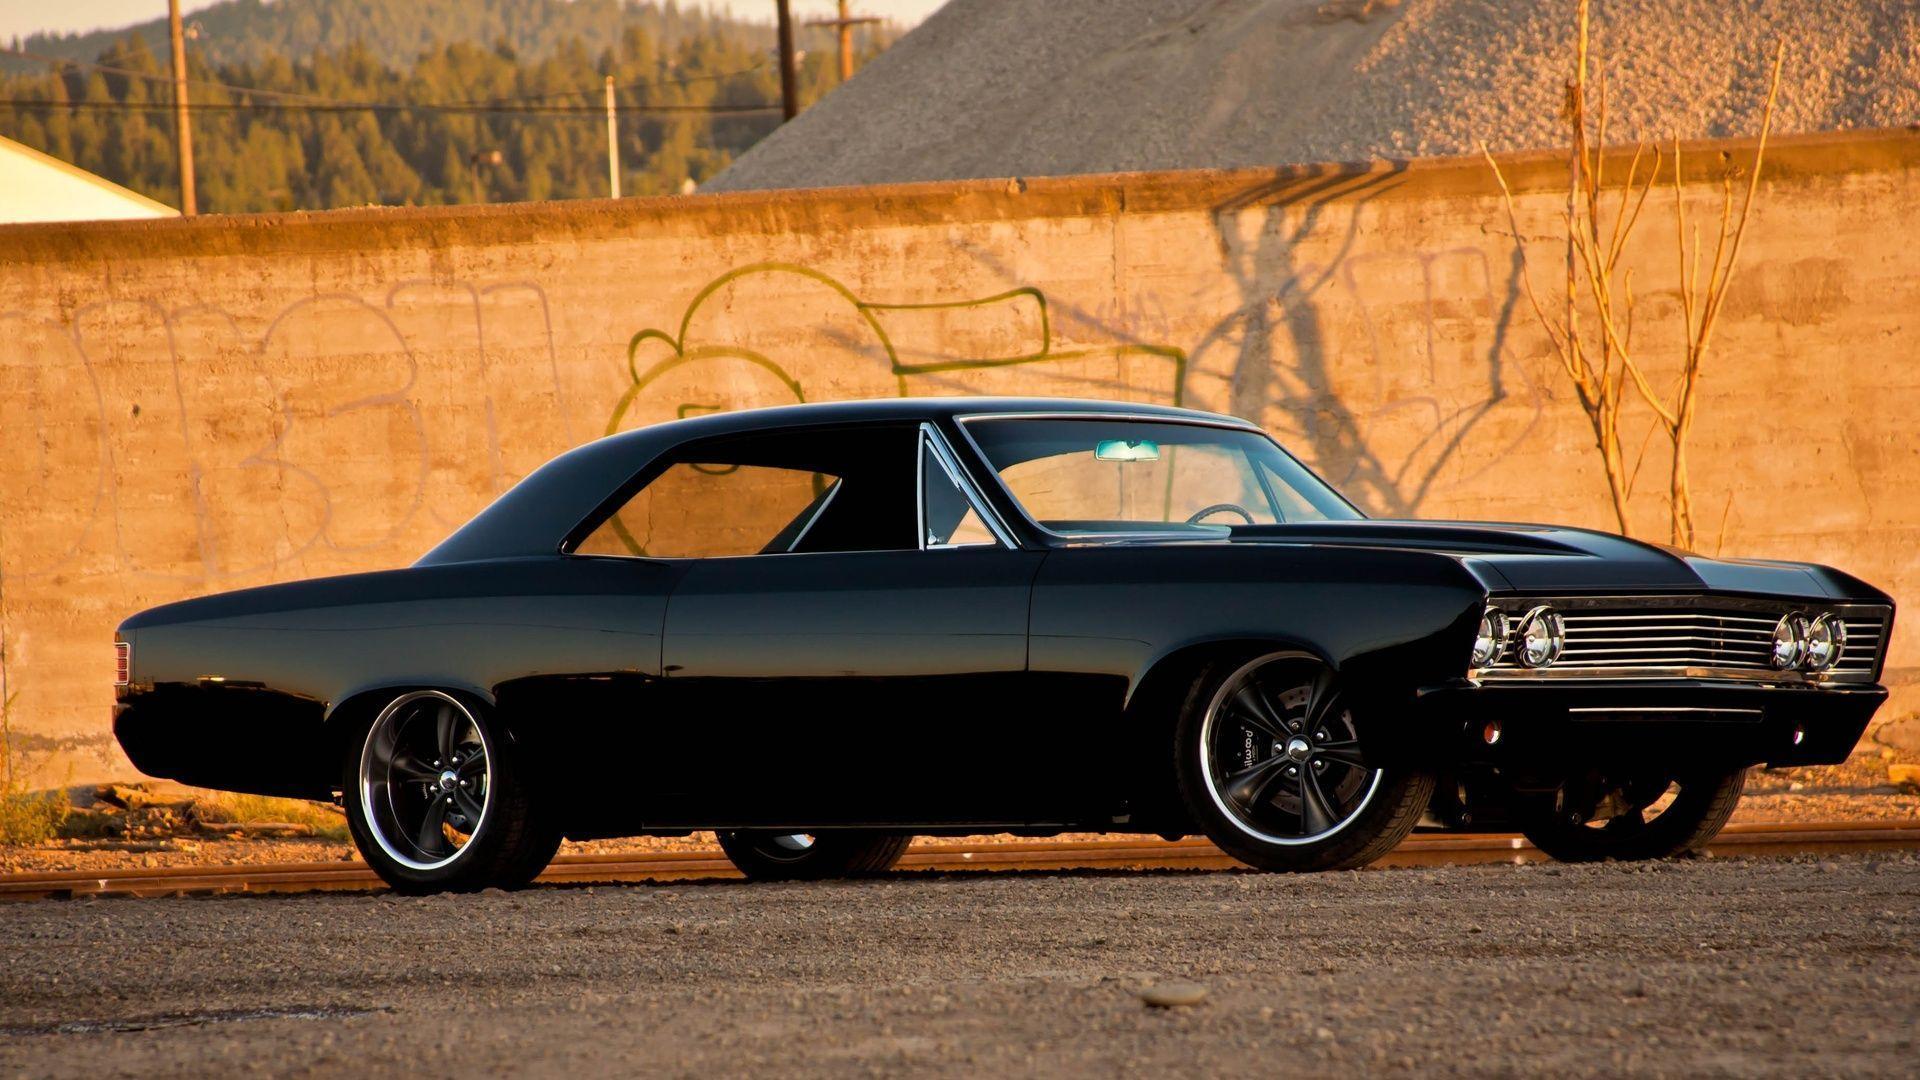 Chevrolet, Muscle Car, Chevrolet Chevelle Ss, Tuning